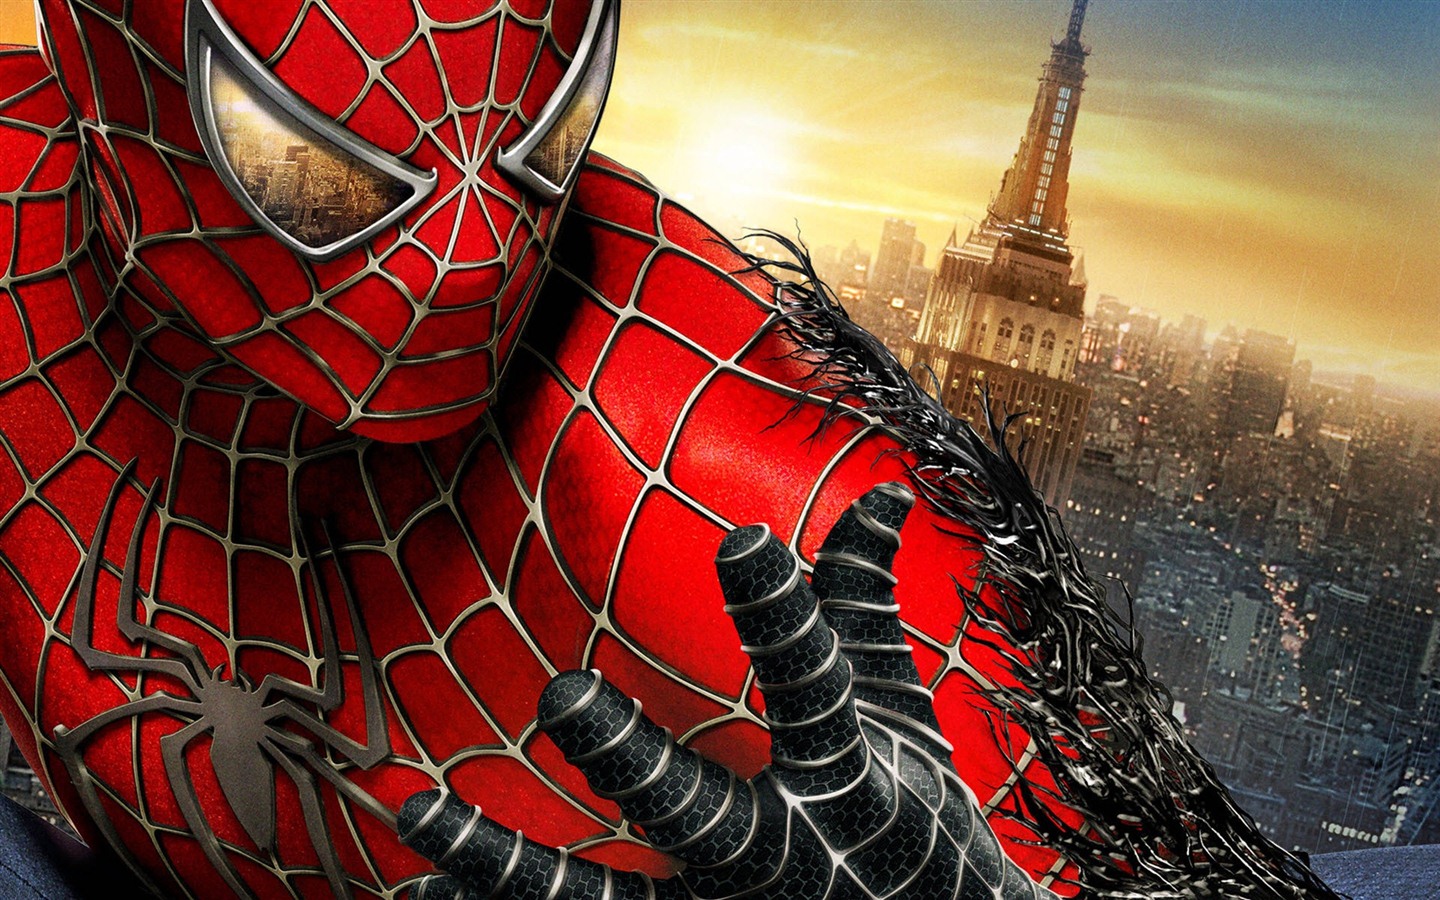 Le 2012 Amazing Spider-Man wallpapers #13 - 1440x900